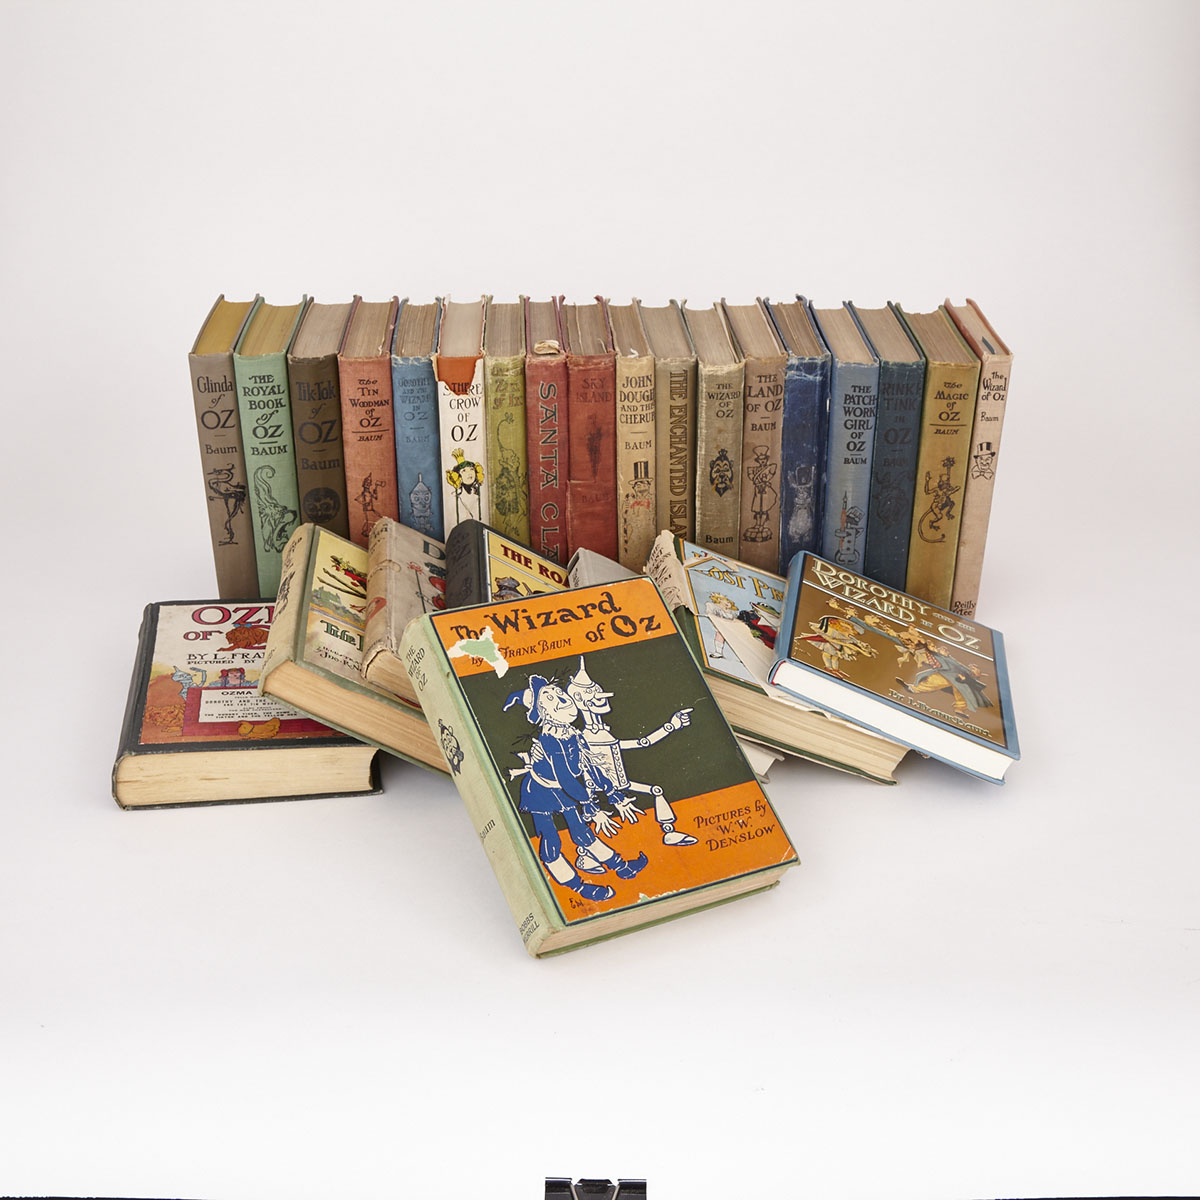 [Books] Library of 25 Volumes of The Wizard of Oz Series of Children’s Stories By L. Frank Baum, 1901-1990